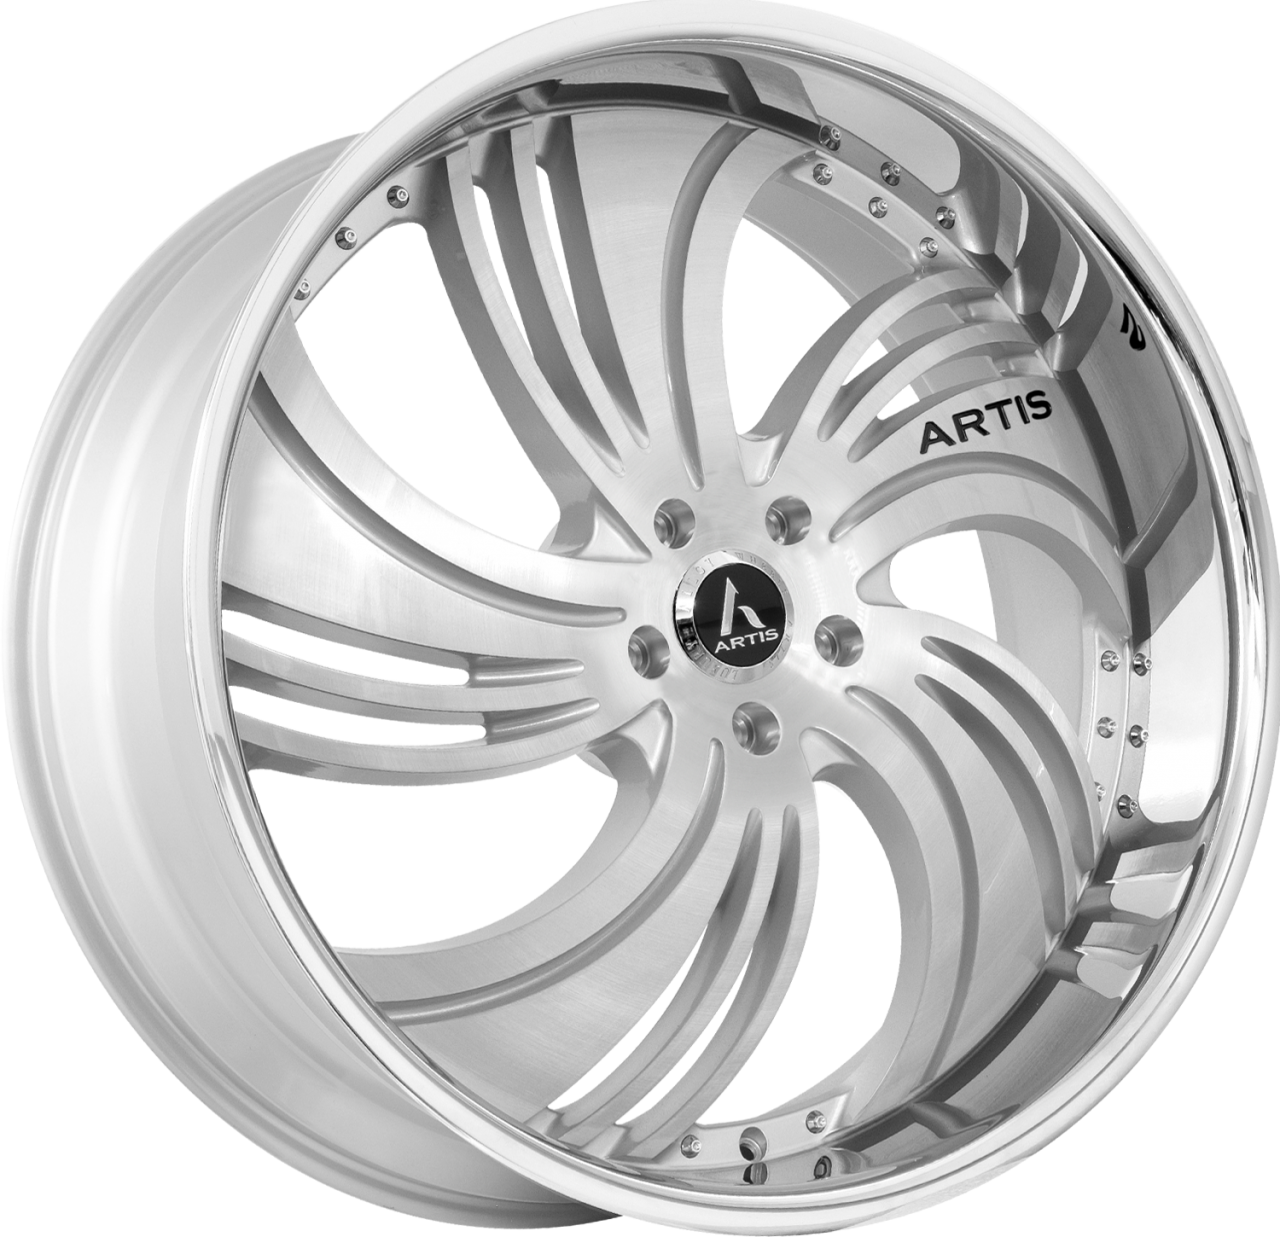 Artis Forged Avenue wheel with Silver finish